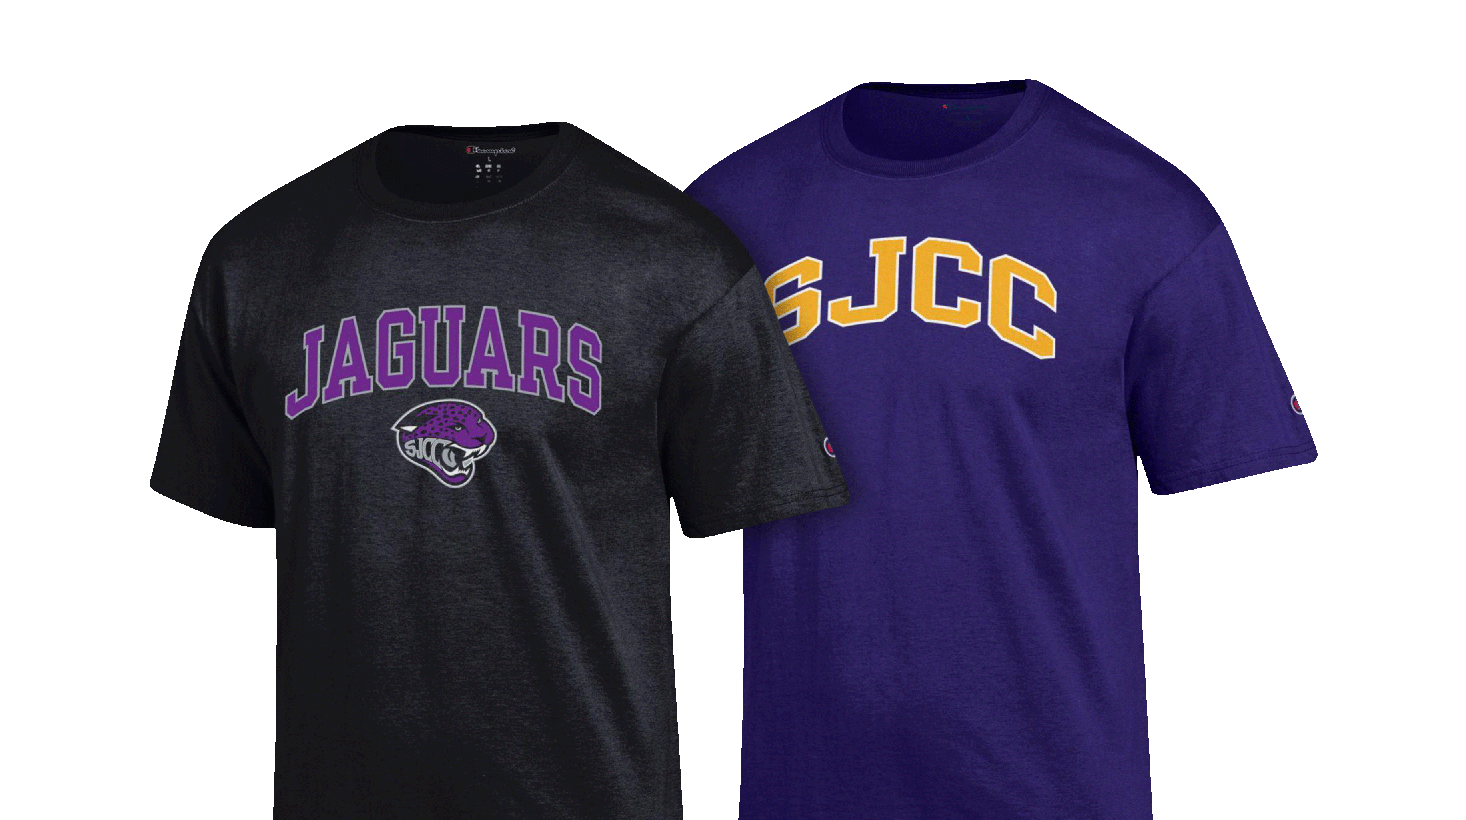 San Jose City College Campus Store Apparel, Merchandise, & Gifts